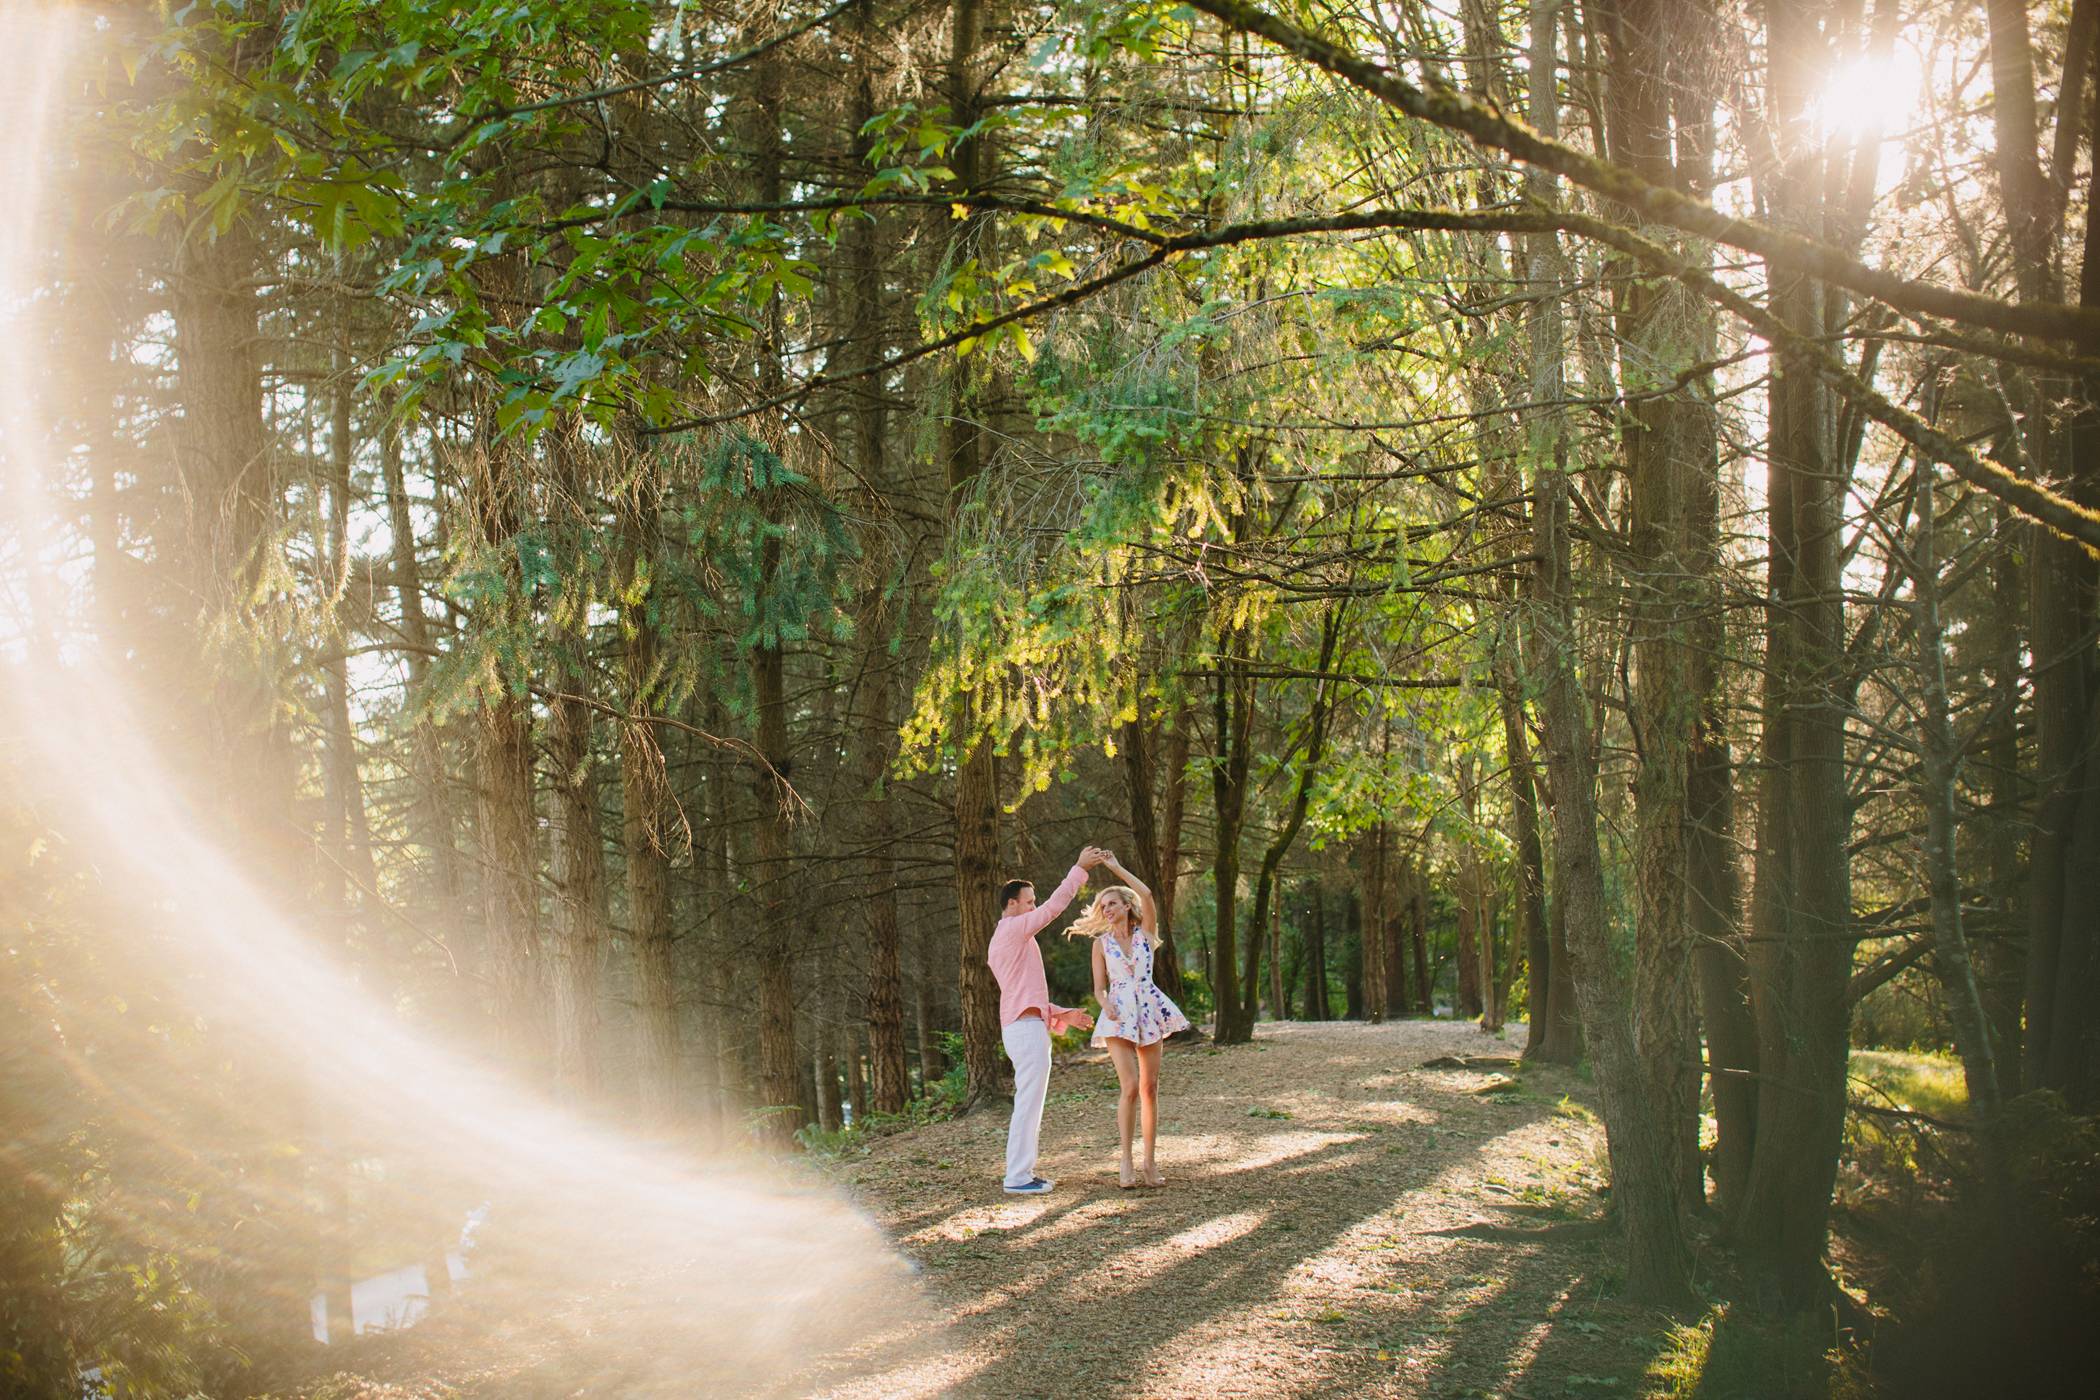 Couple dancing in westcoast forest